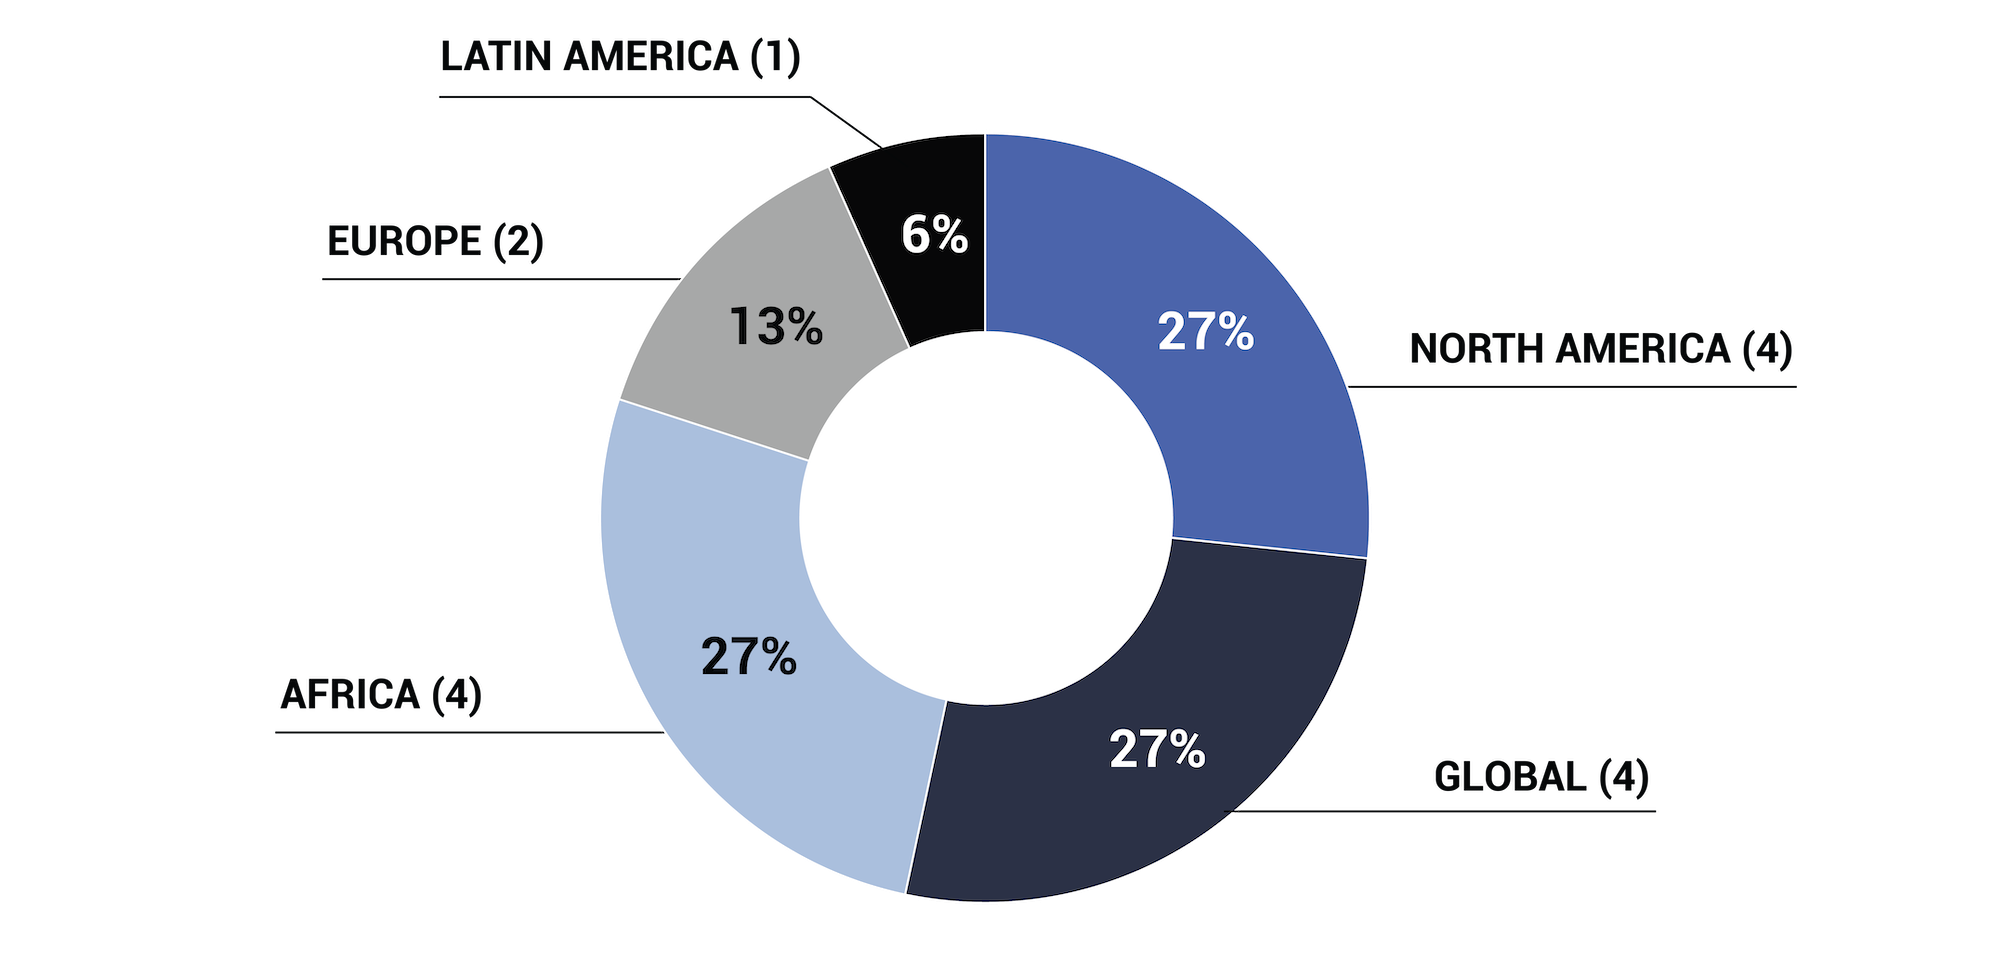 Figure 3 is a donut chart illustrating the number and percent of interviewees base on the geographical focus of their work.